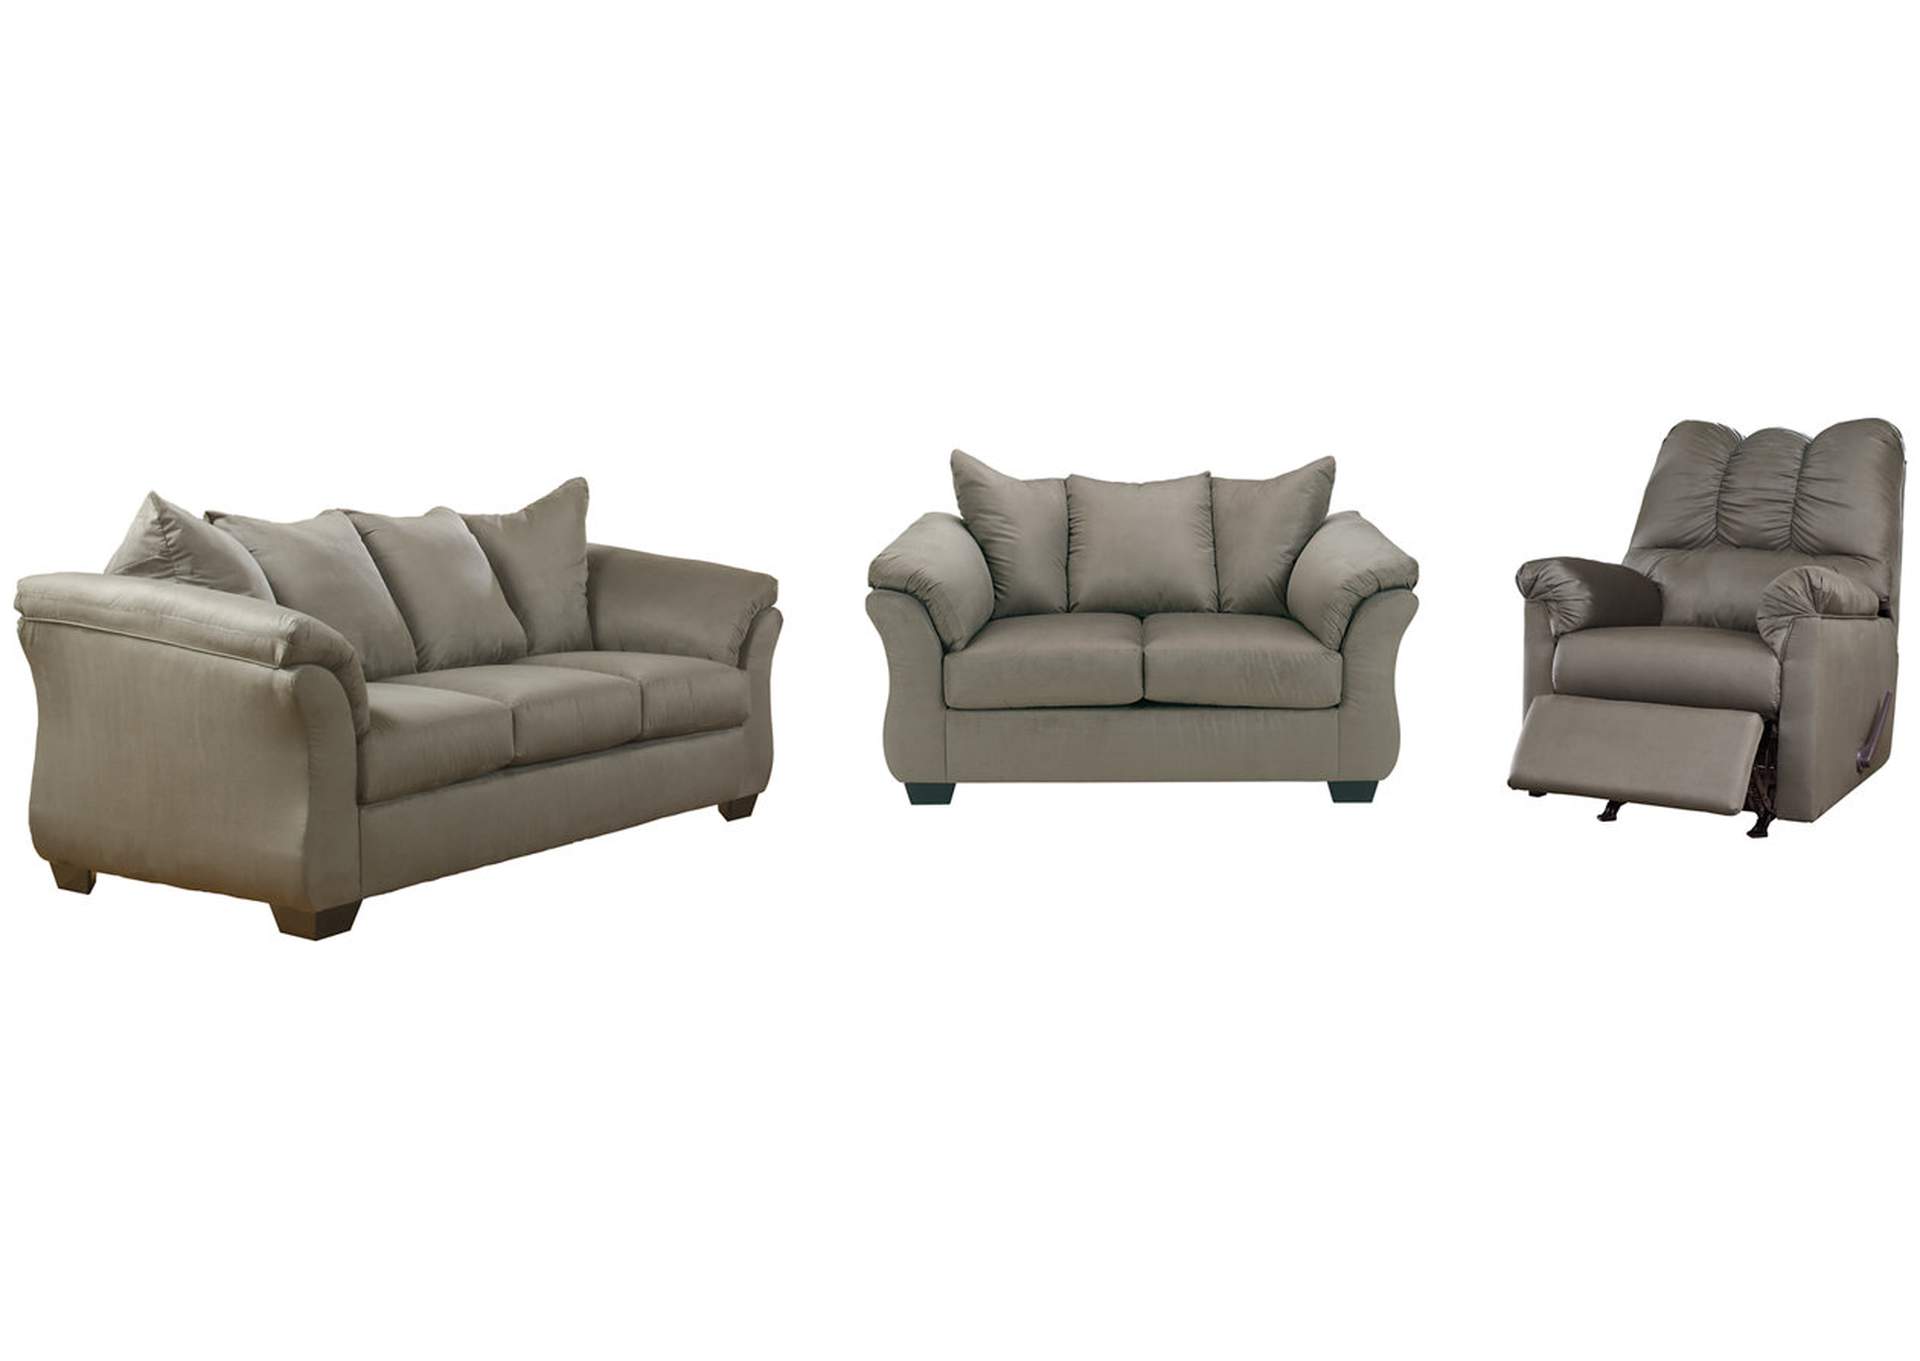 Darcy Sofa, Loveseat and Recliner,Signature Design By Ashley